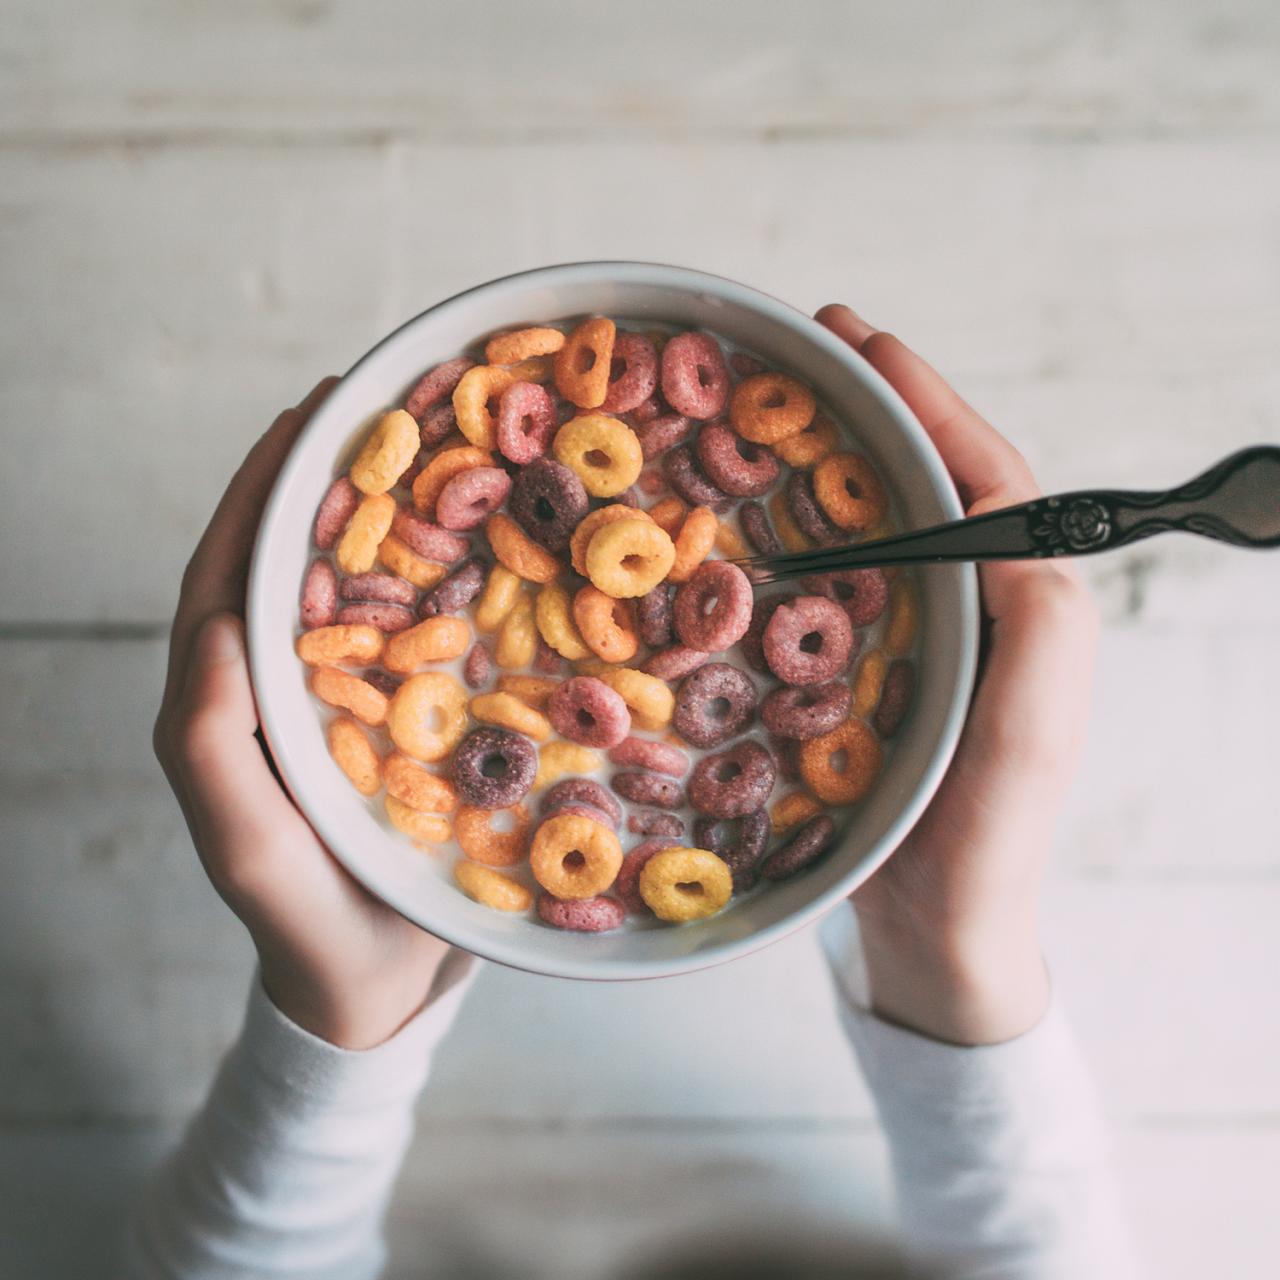 Is cereal healthy?